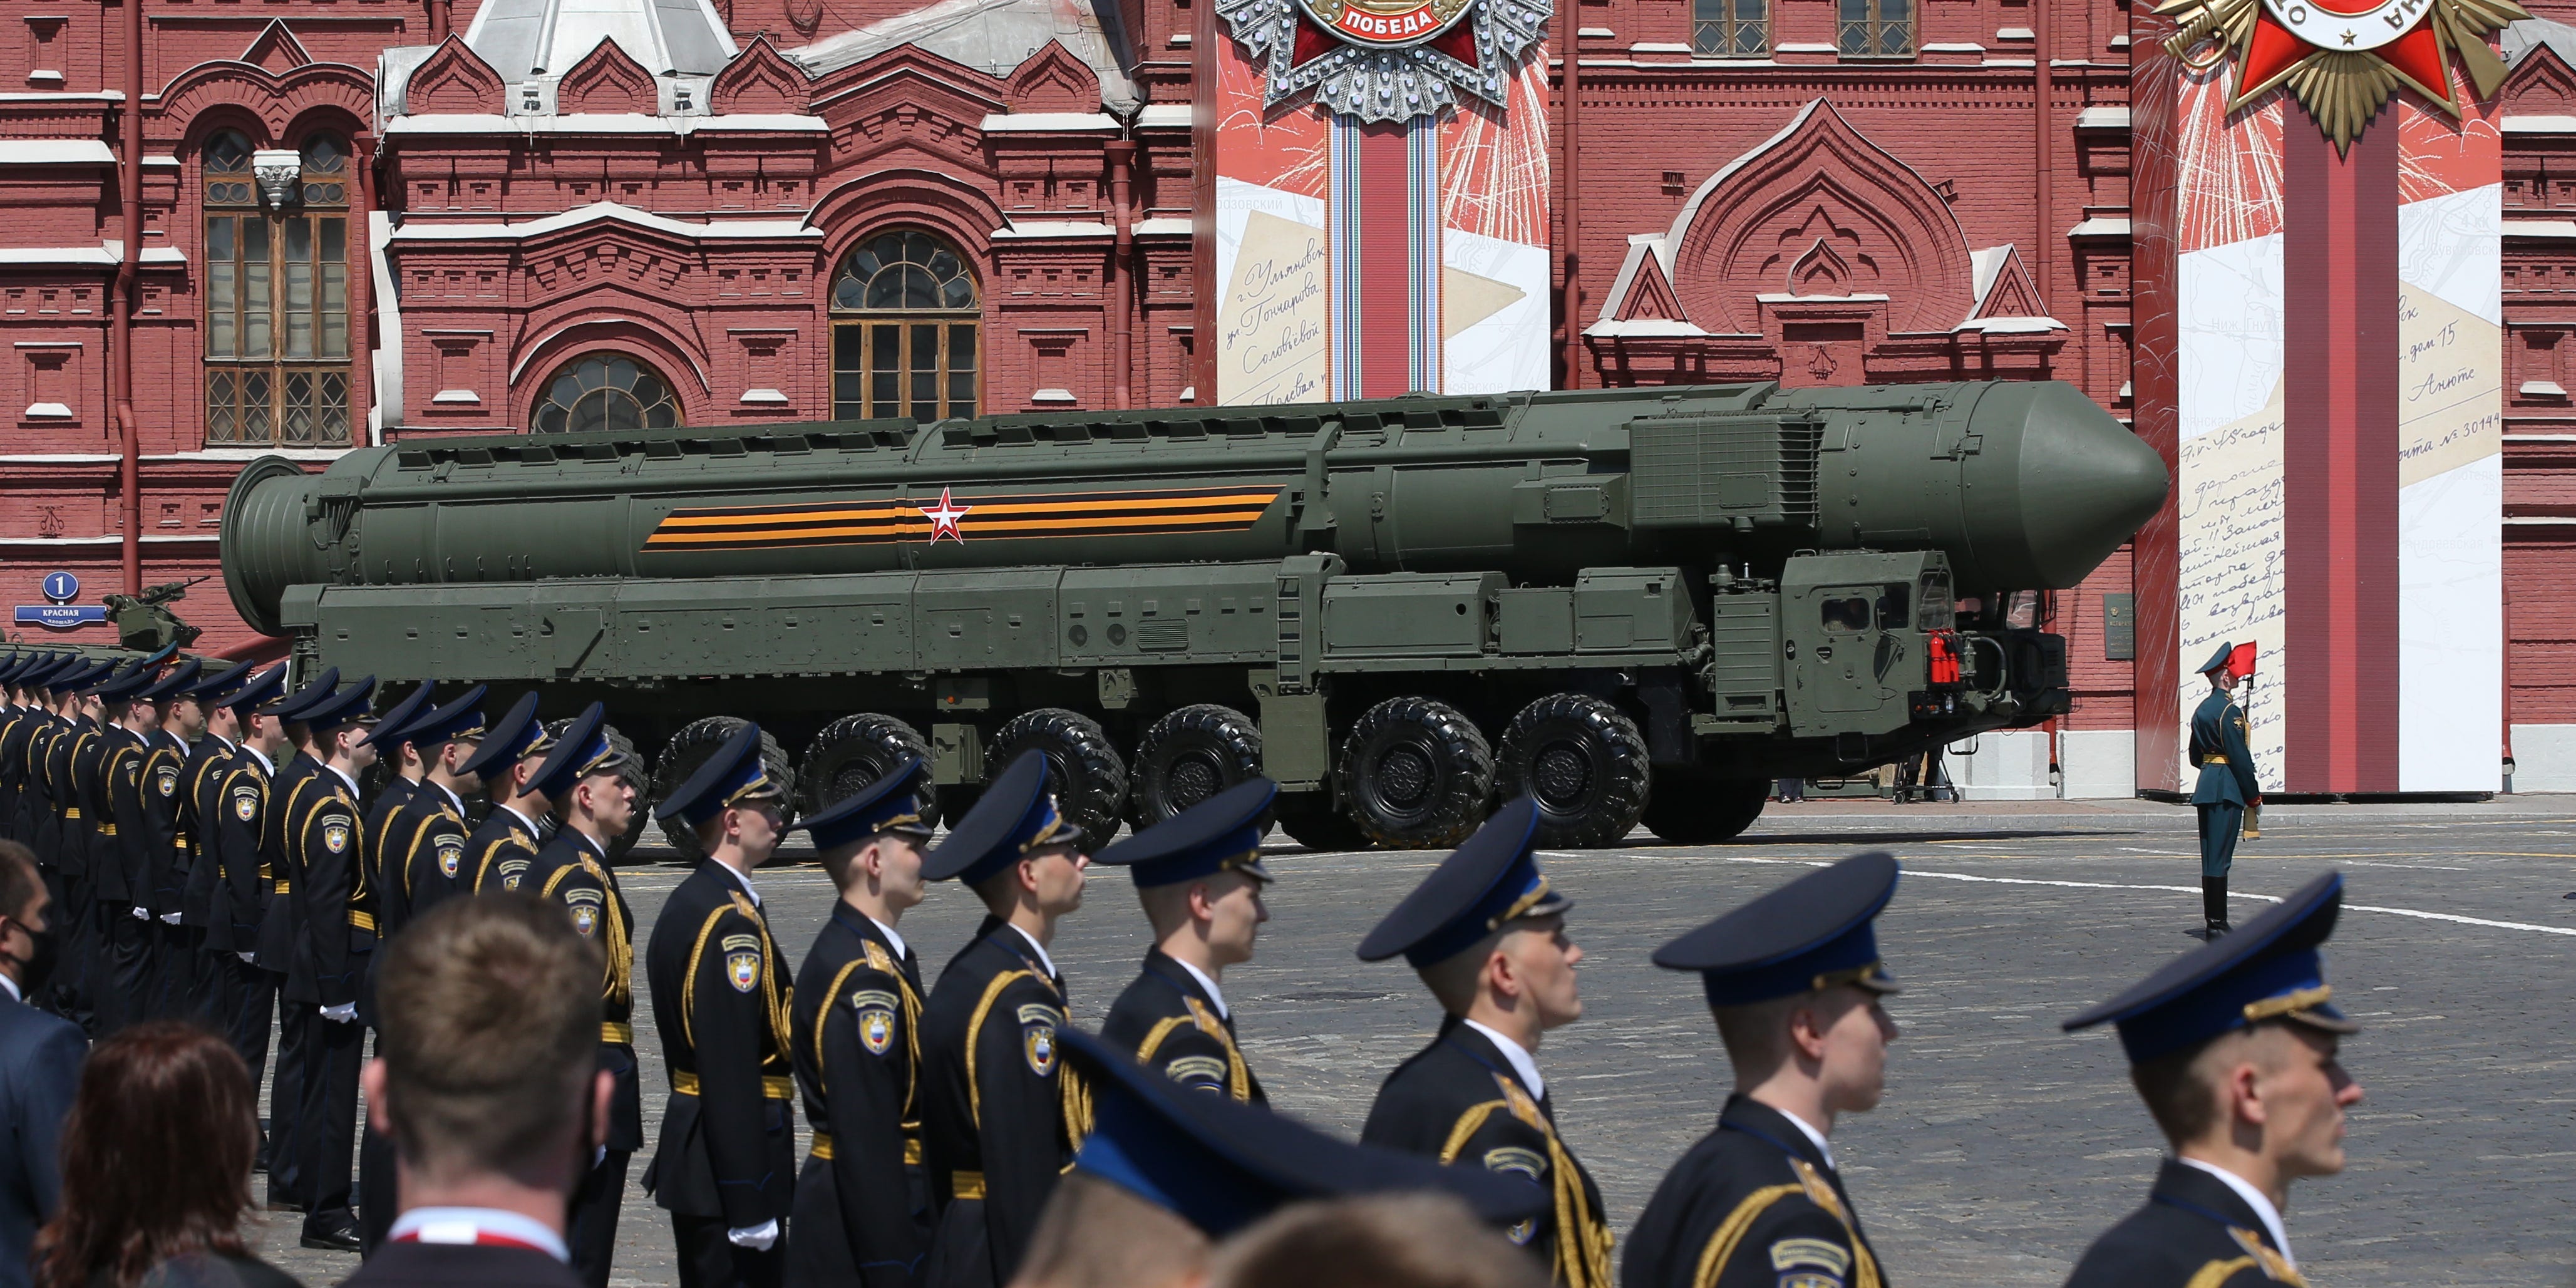 secret military files reveal when russia would consider using nuclear weapons, including the destruction of 20% of its ballistic missile submarines: ft